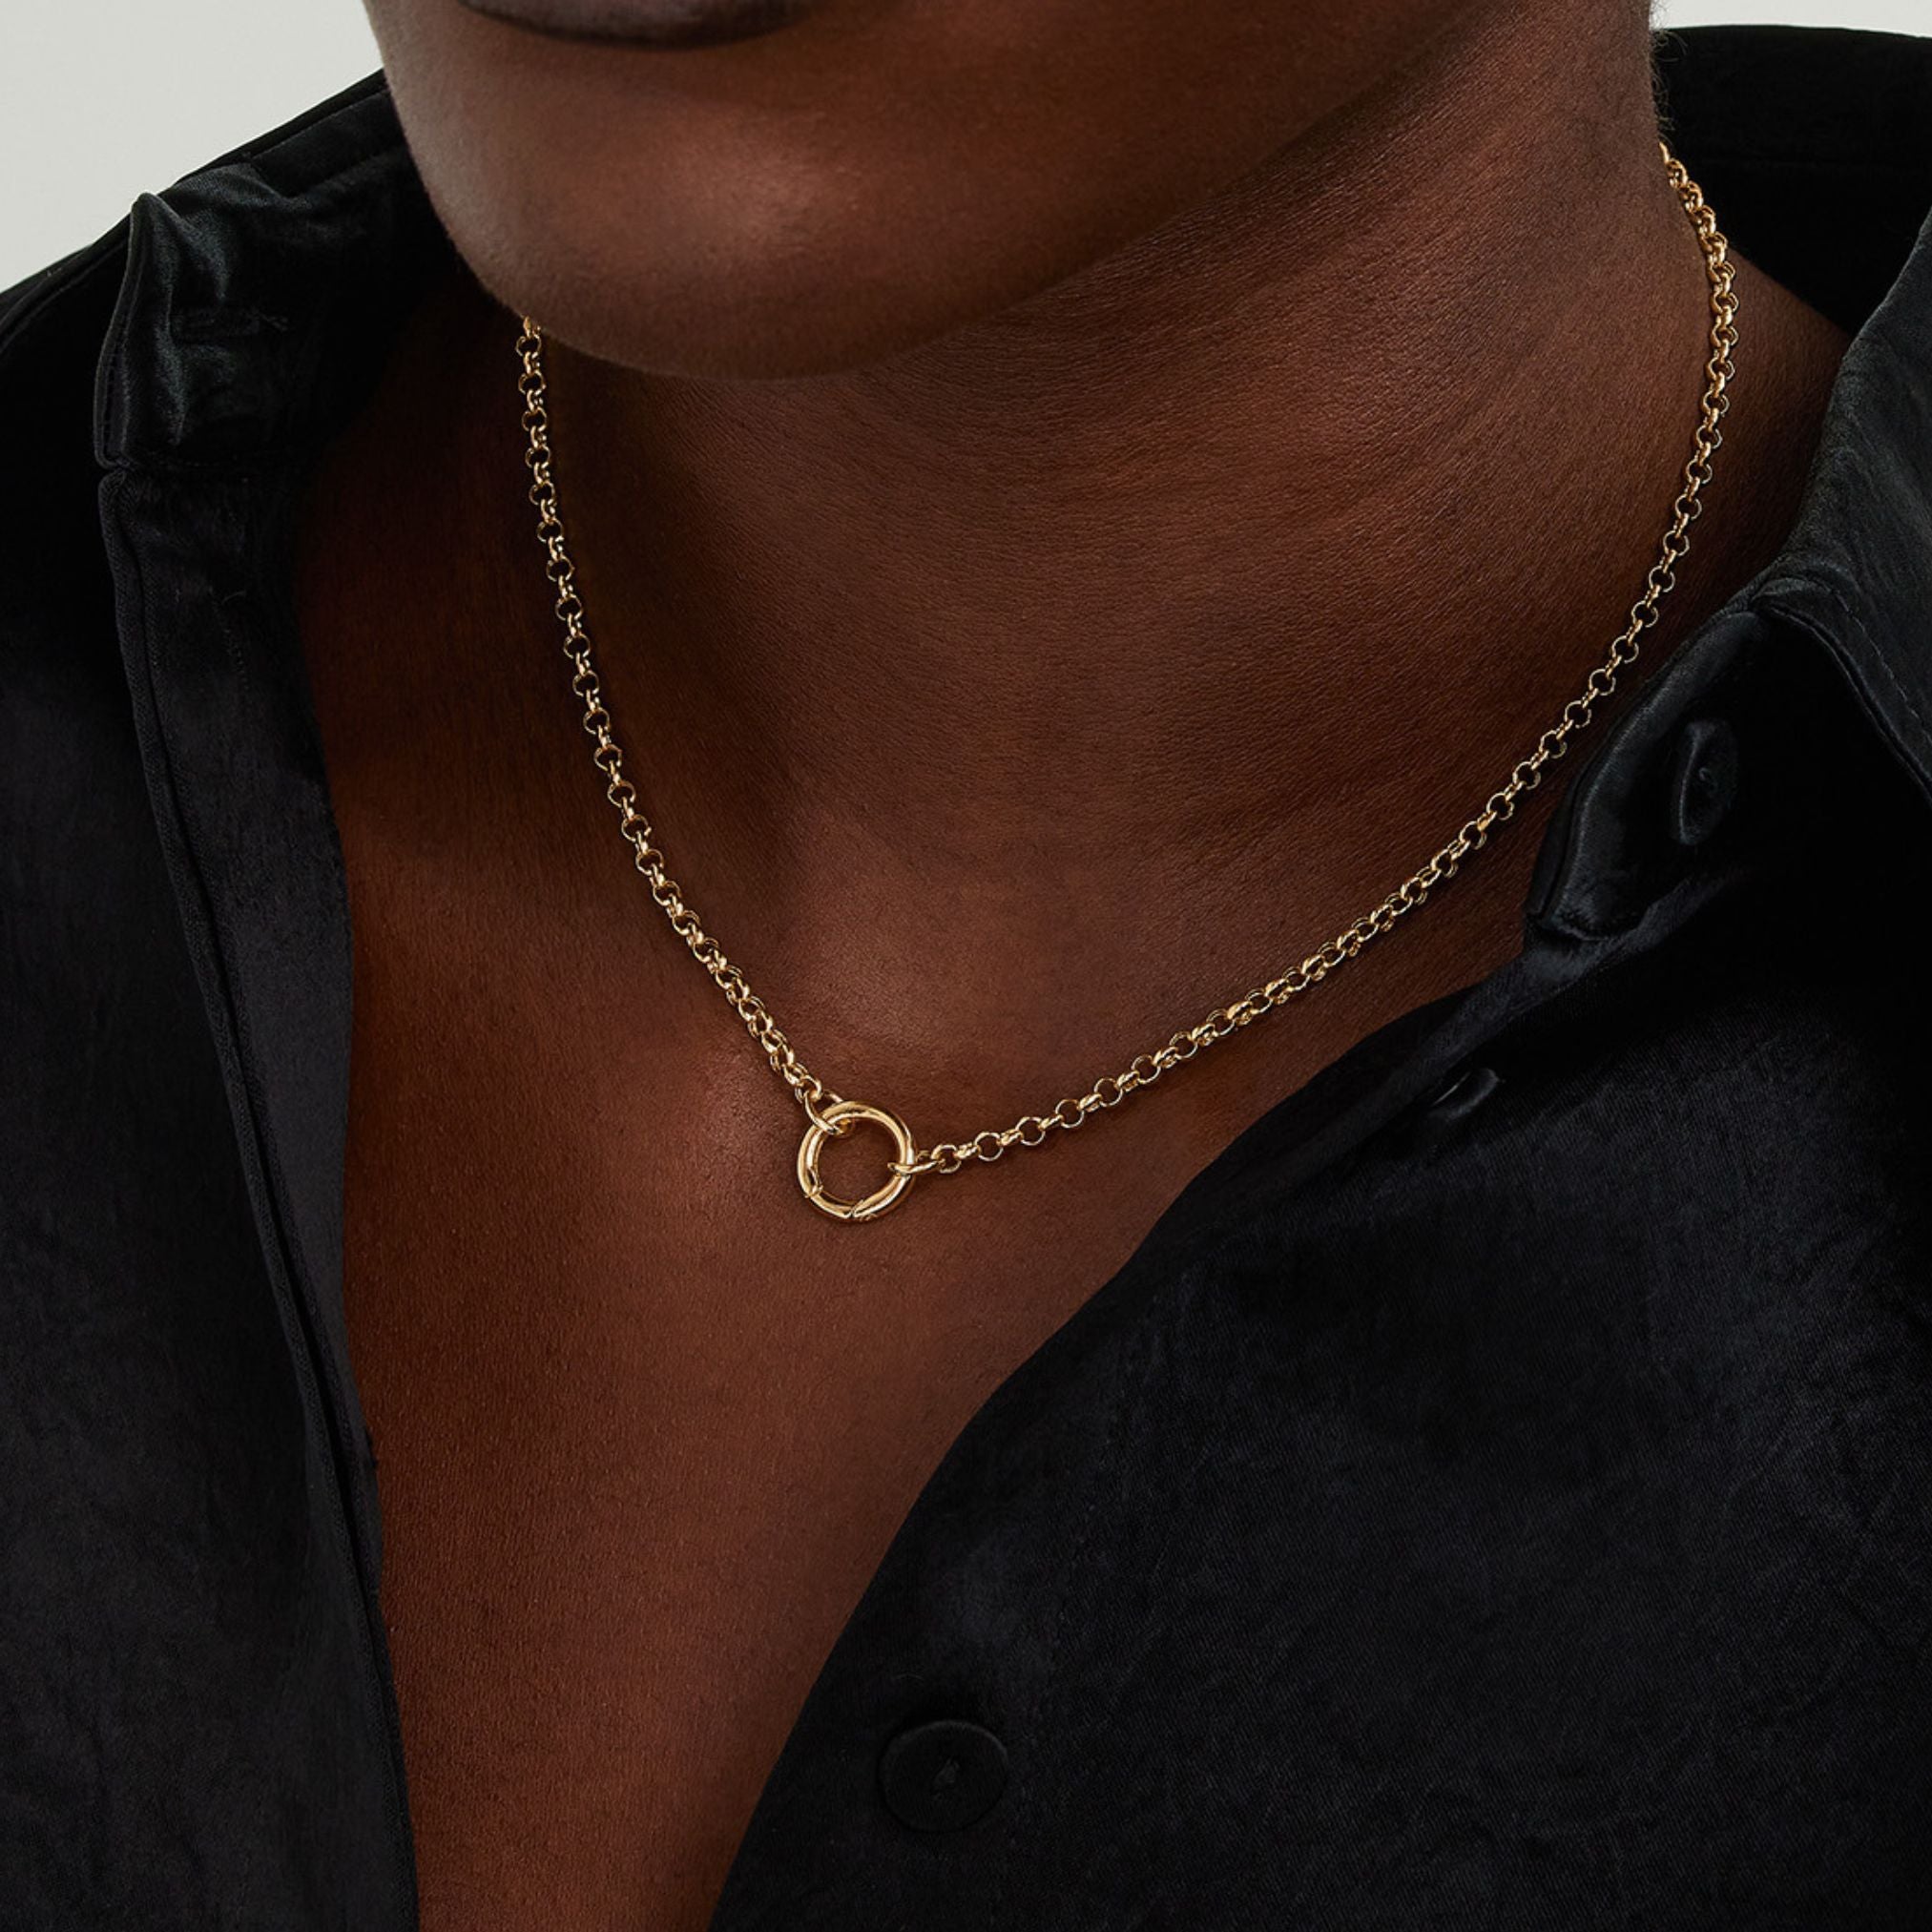 24K Gold Rolo Chain Charm Necklace